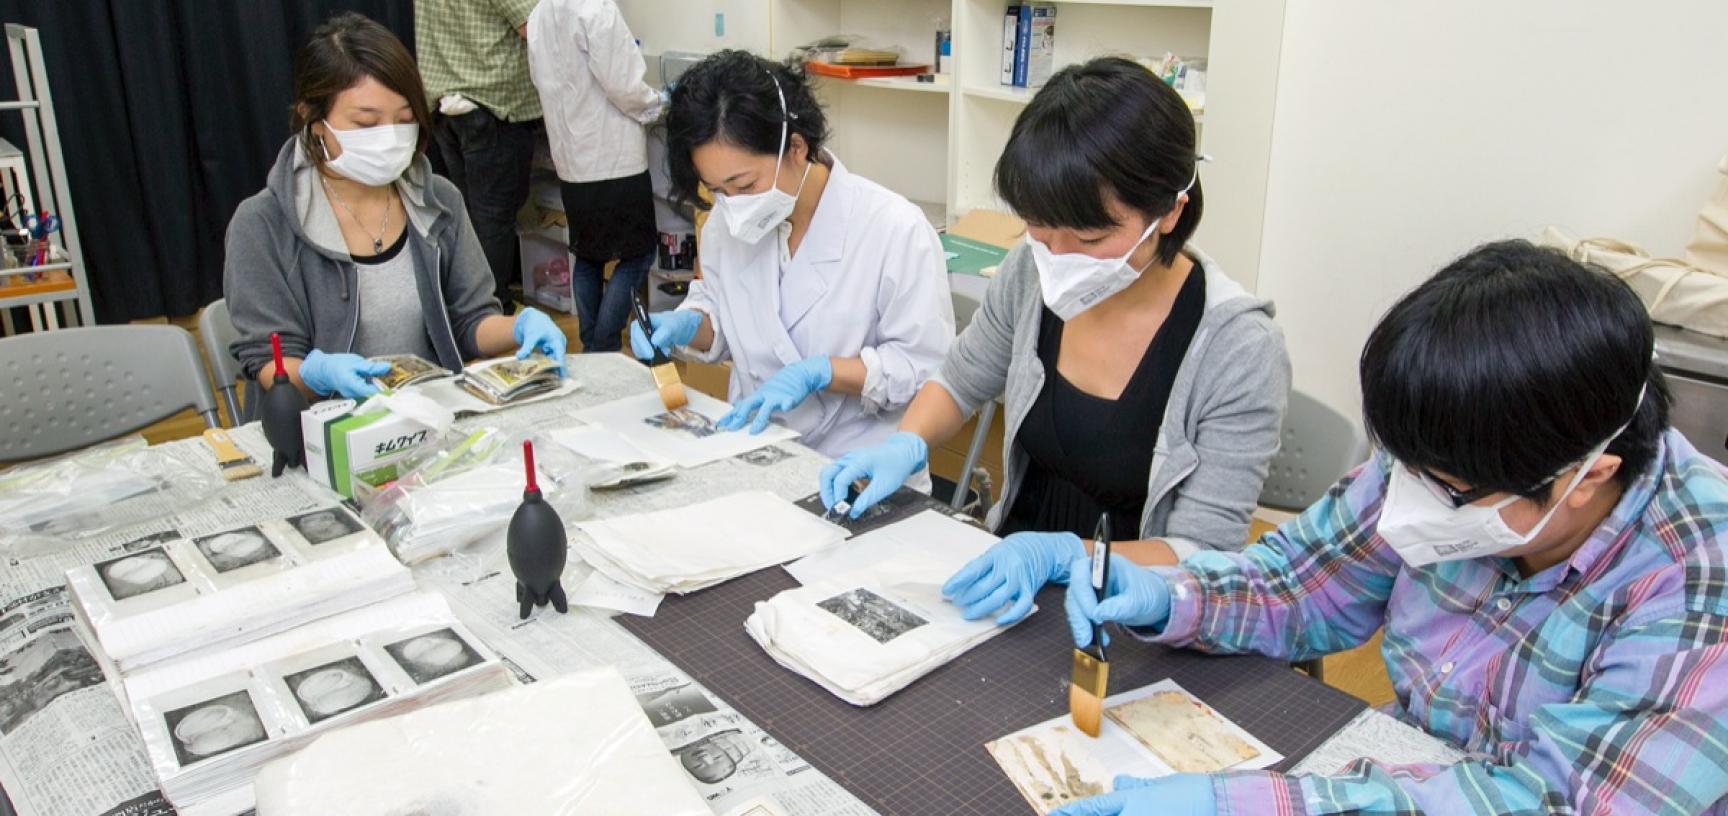 Conservation work being carried out by volunteers. (Copyright RD3 Project/Rikuzentakata City Museum)